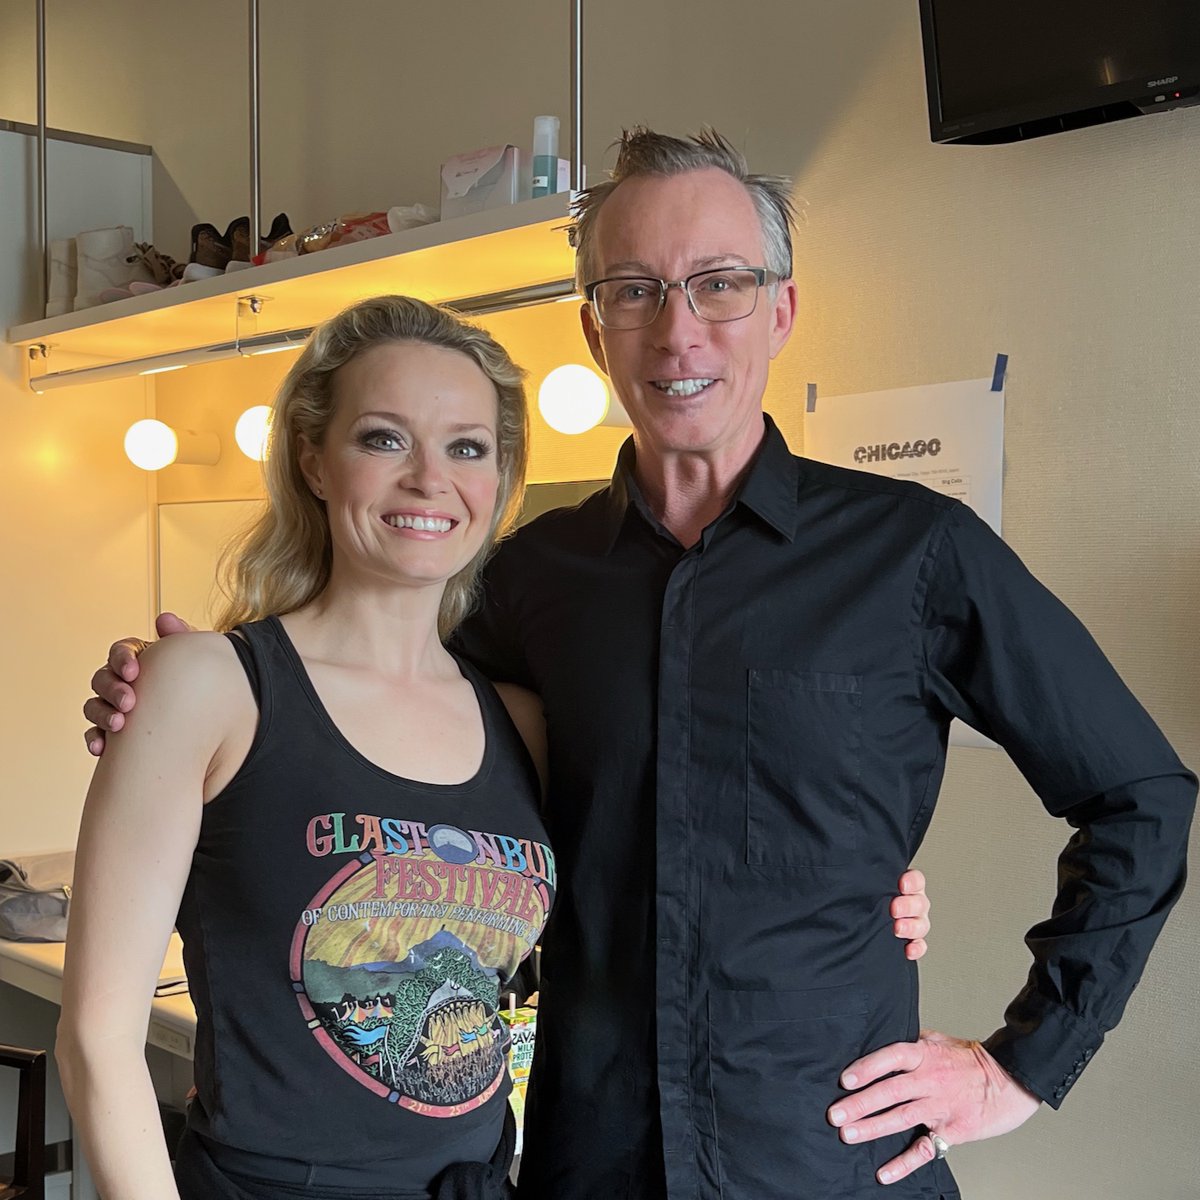 The musical @Chicago_Japan featuring Broadway and West End stars just opened in Tokyo, I had a chat with Sarah Soetaert in the Roxie role who tells how it feels on stage in the moment when everything aligns. Listen now on #guyperryman Interviews podcast. guyperrymaninterviews.buzzsprout.com